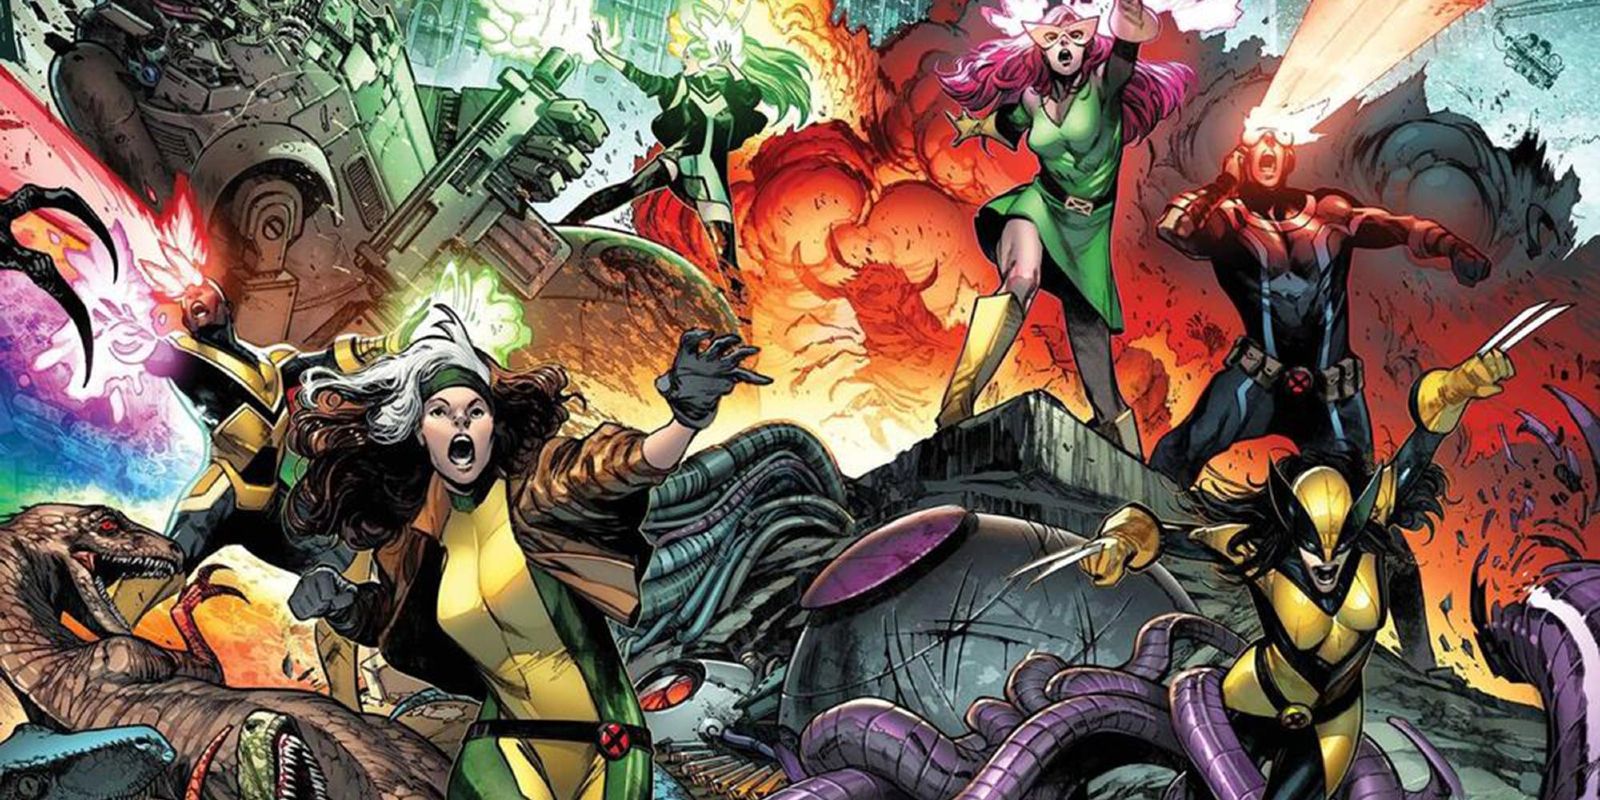 X-Men Cover featuring Synch, Rogue, Polaris, Cyclops, Jean Grey, and Wolverine from Marvel Comics